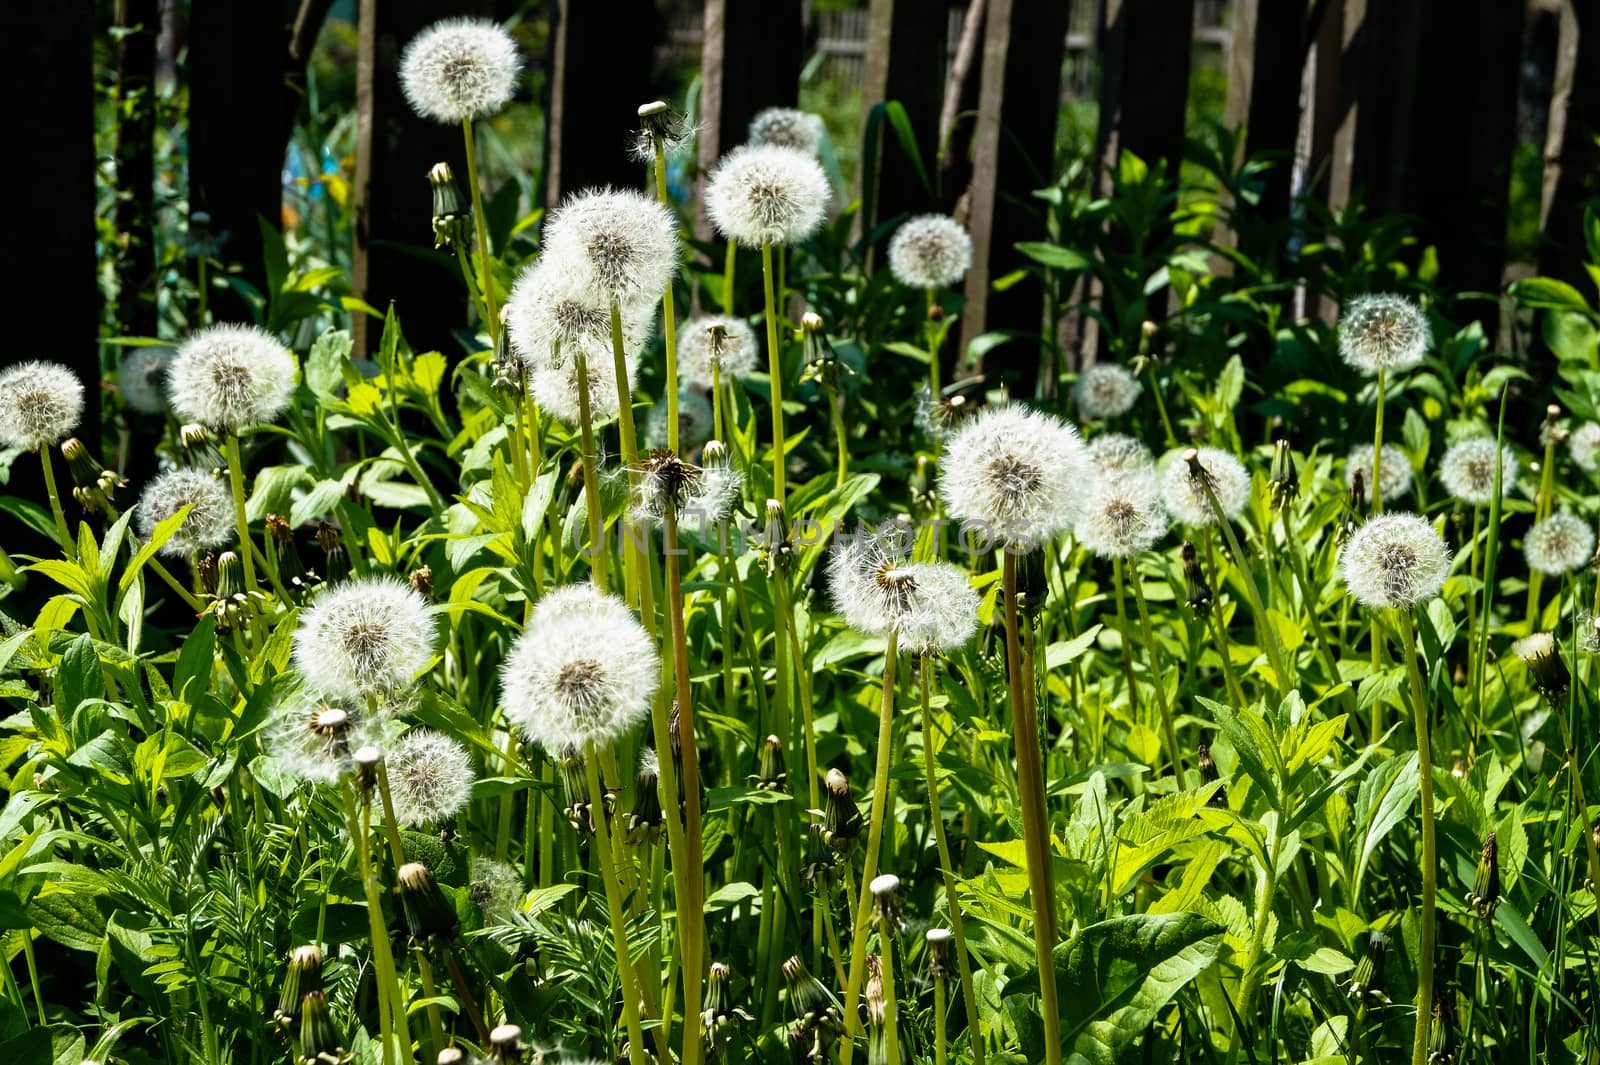 dandelions grow at the fence